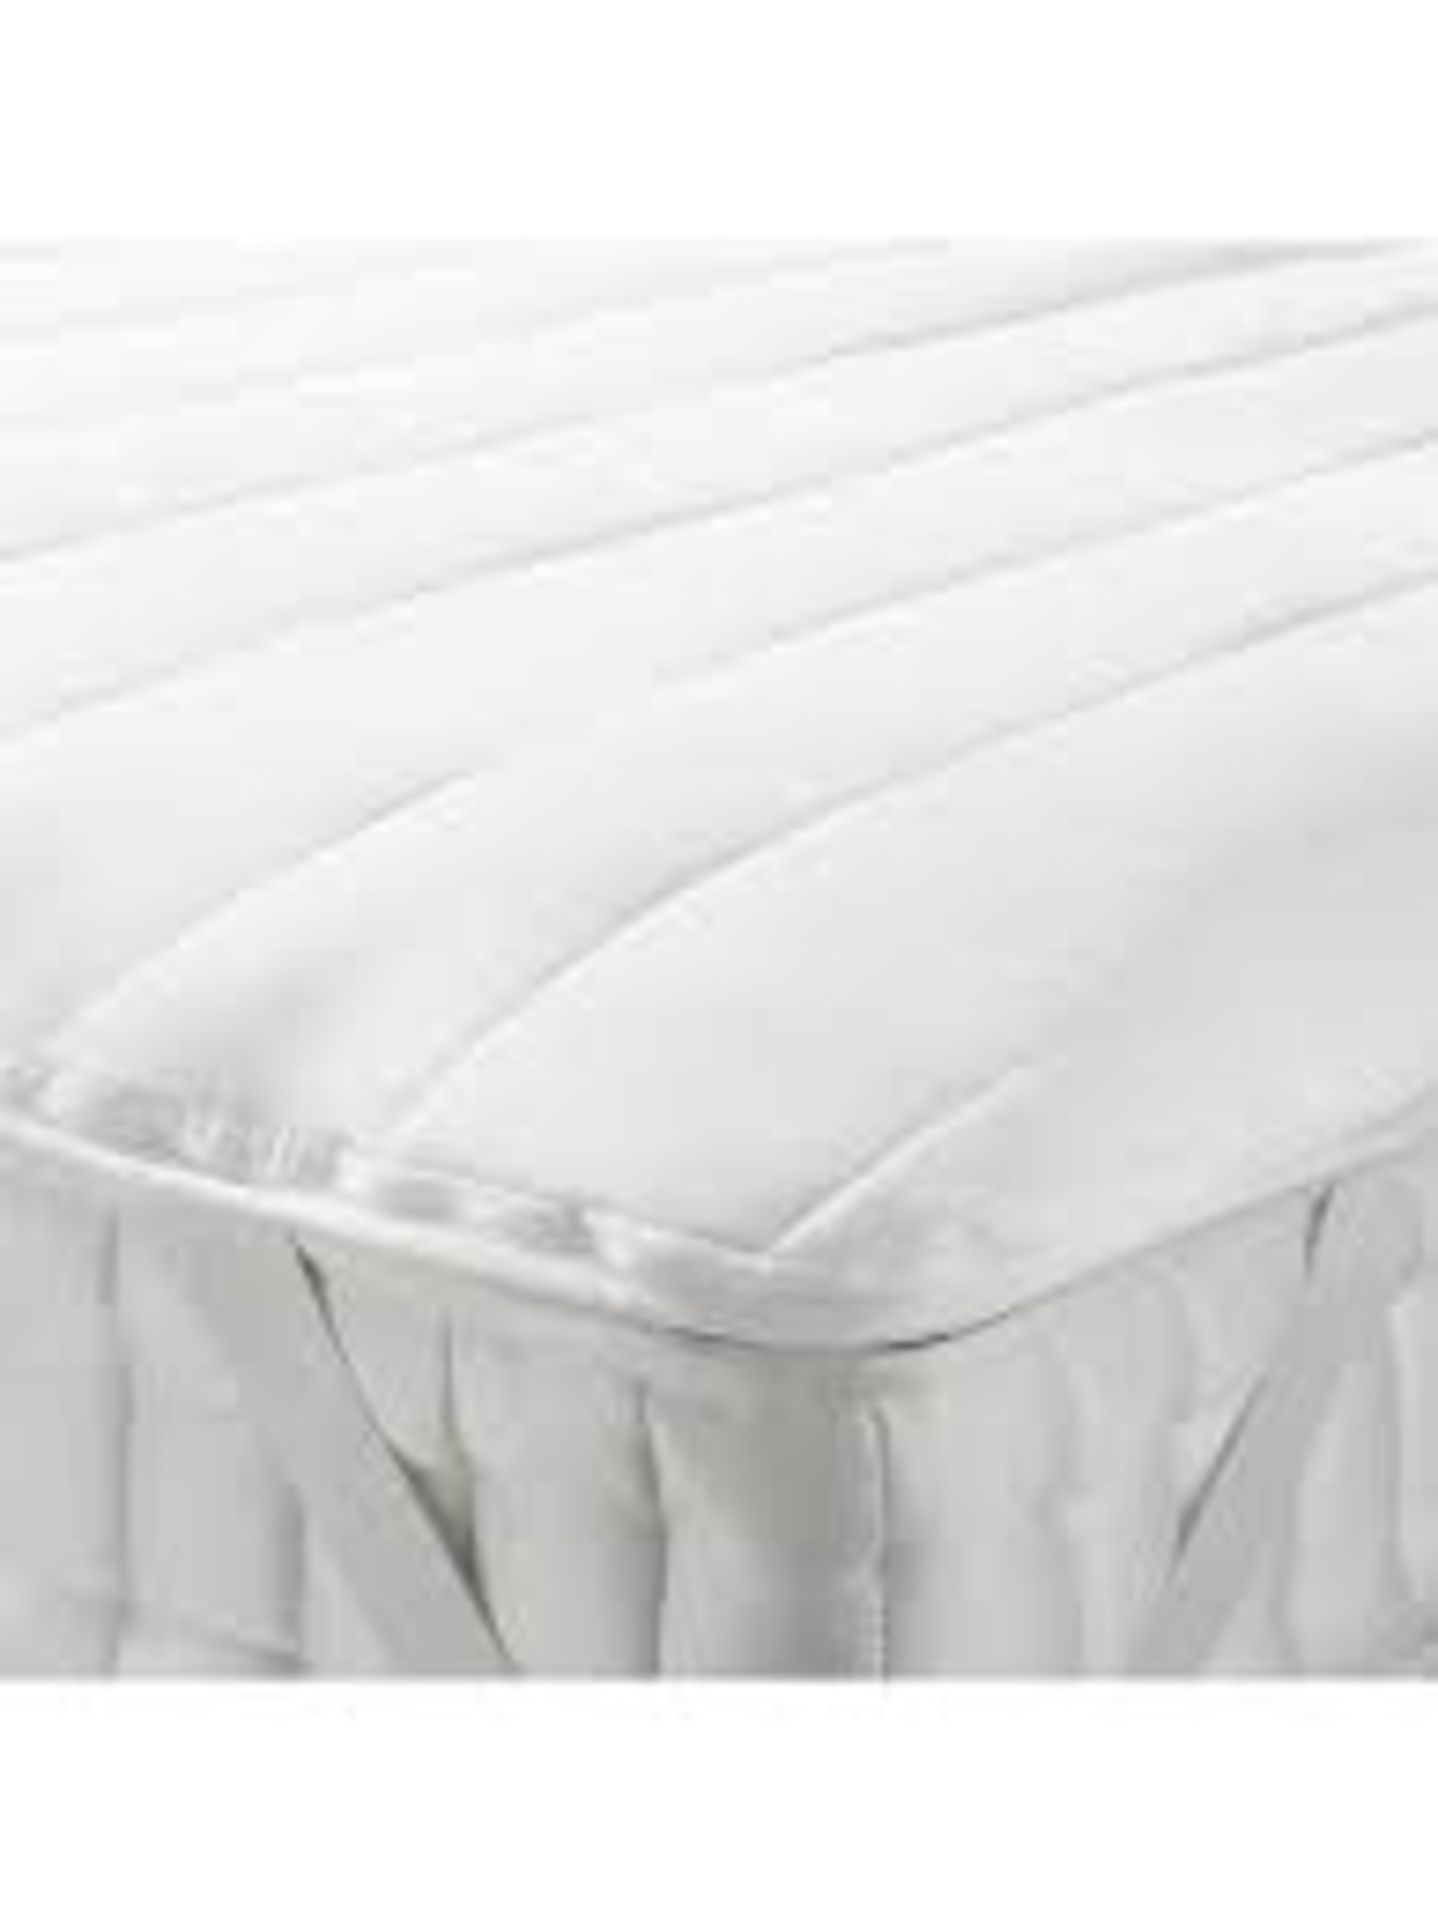 Boxed, Snuggledown Intelligent Warmth, King-size Duvet, RRP£110.00 (4412423) (Public Viewing and